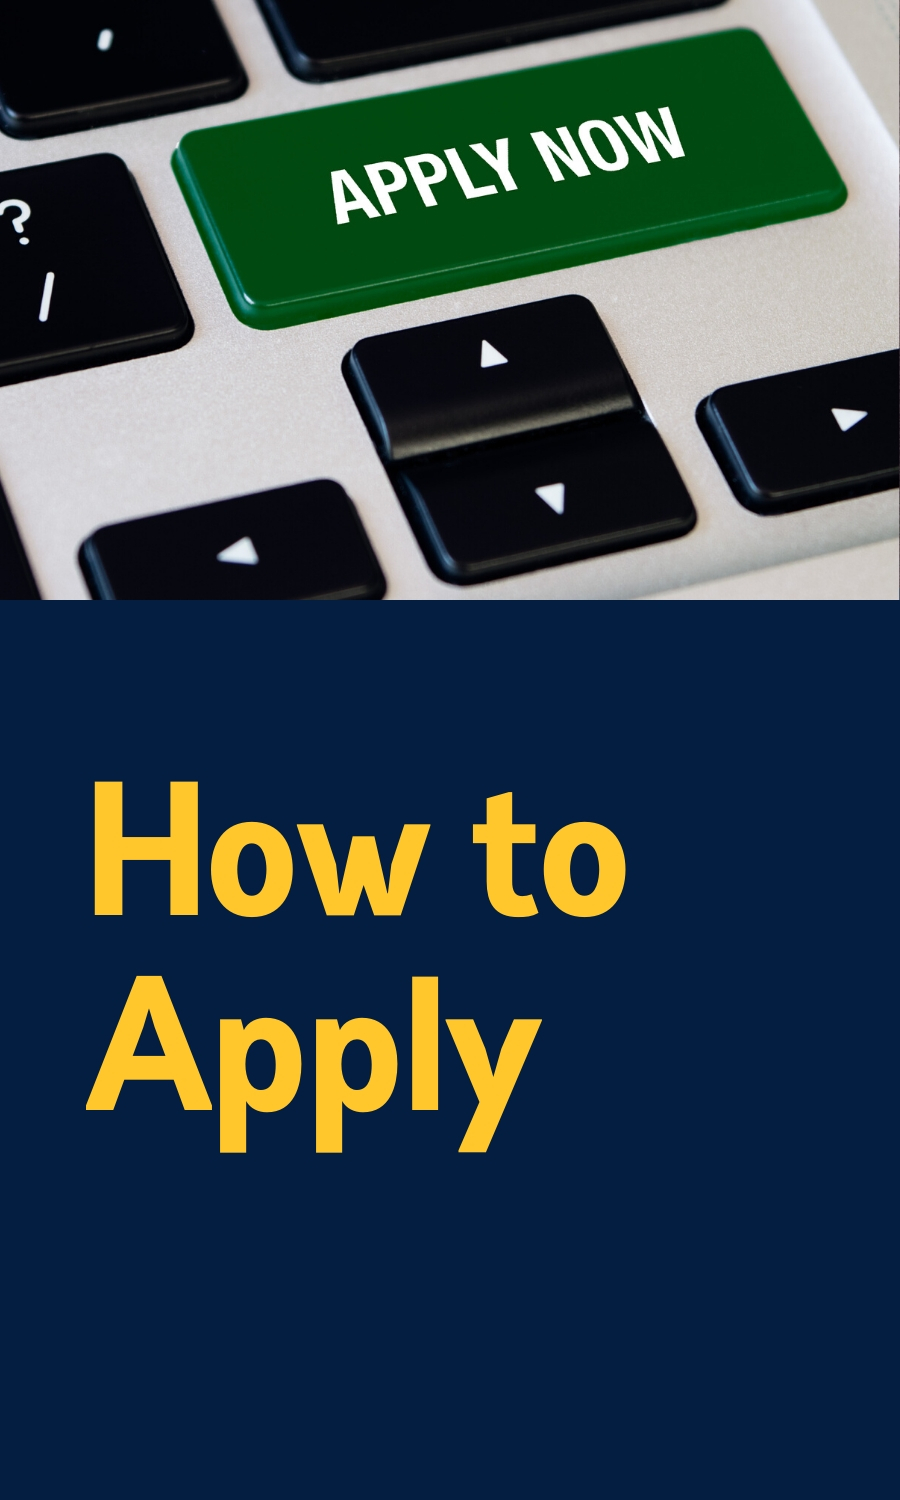 MA how to apply